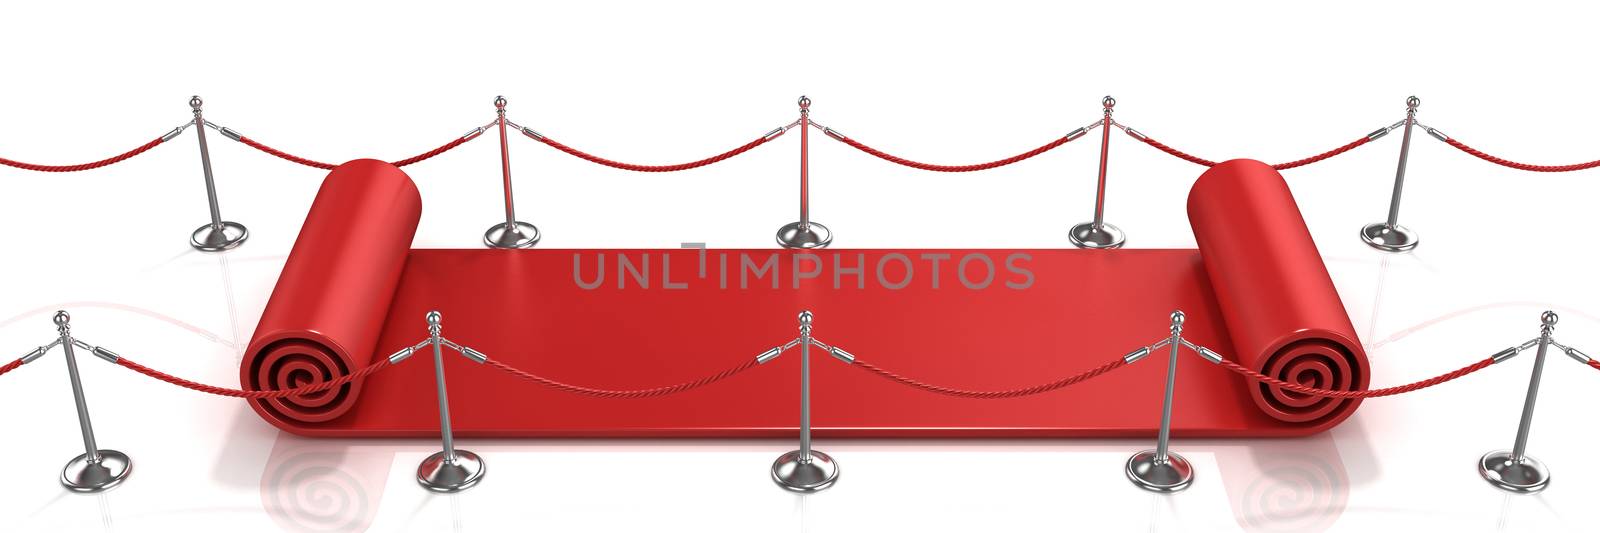 Red carpet unrolling concept on white background